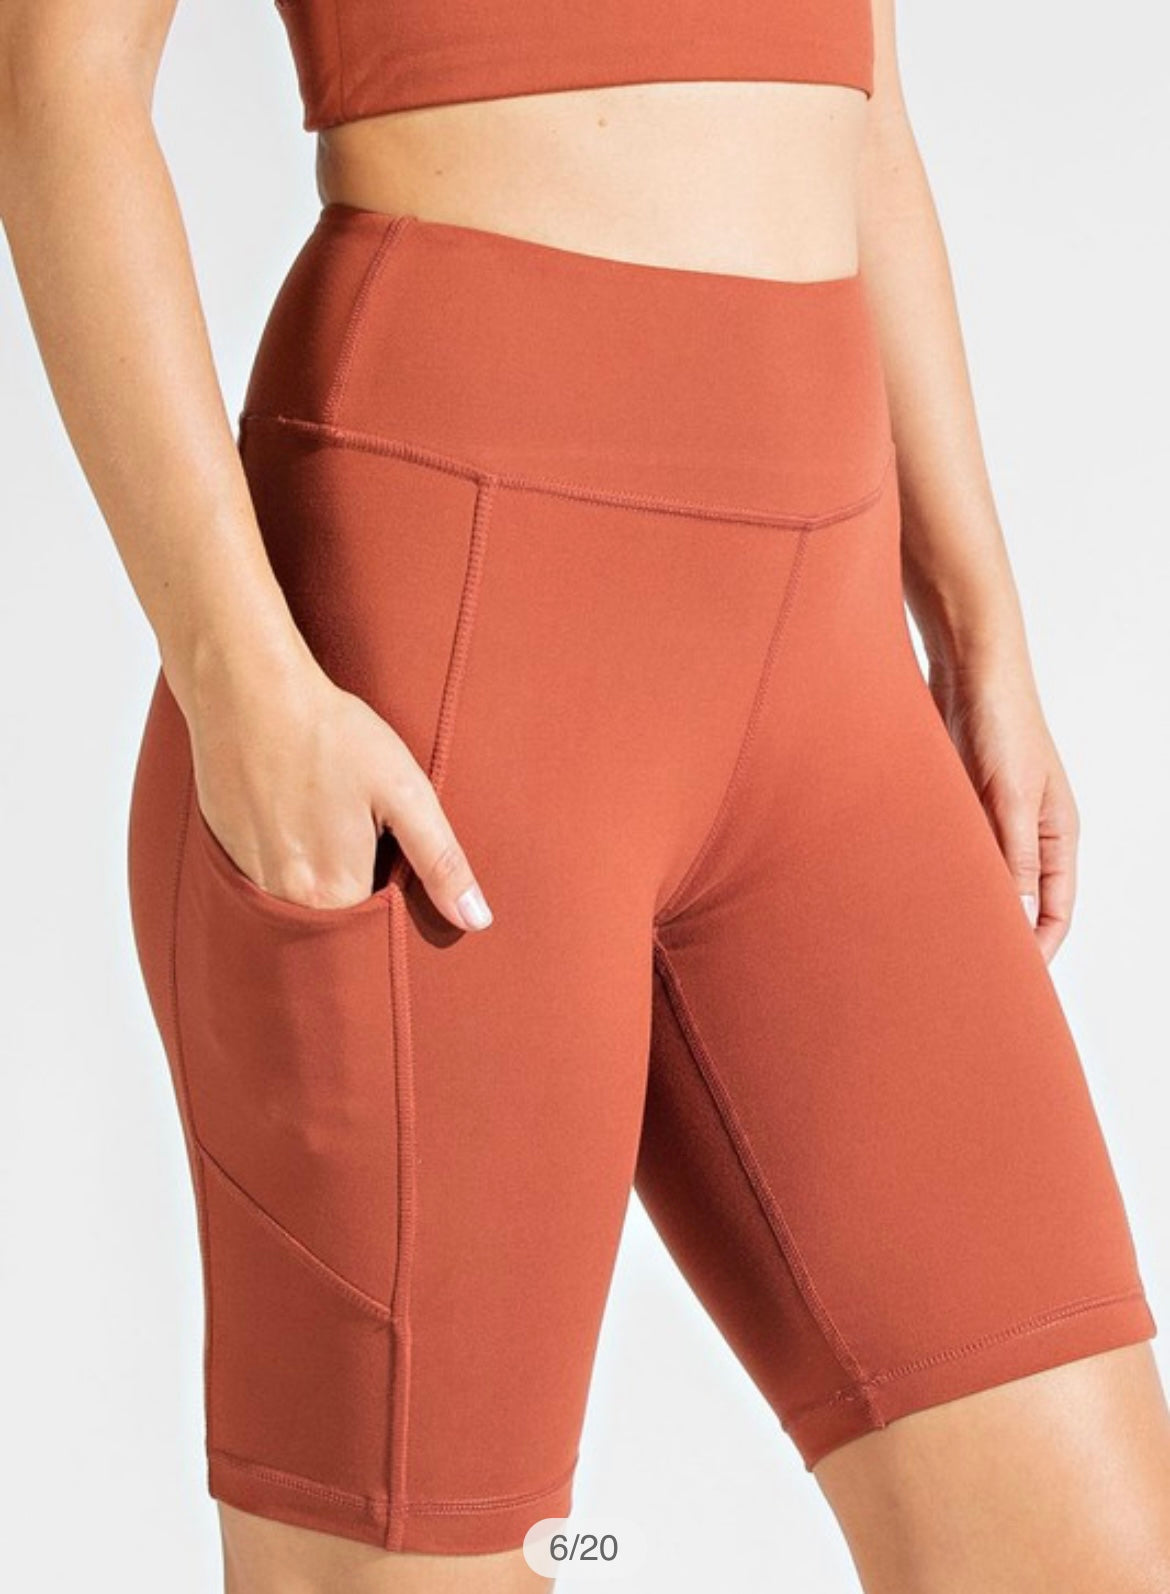 Rae Exercise Biker Shorts in Multiple Colors